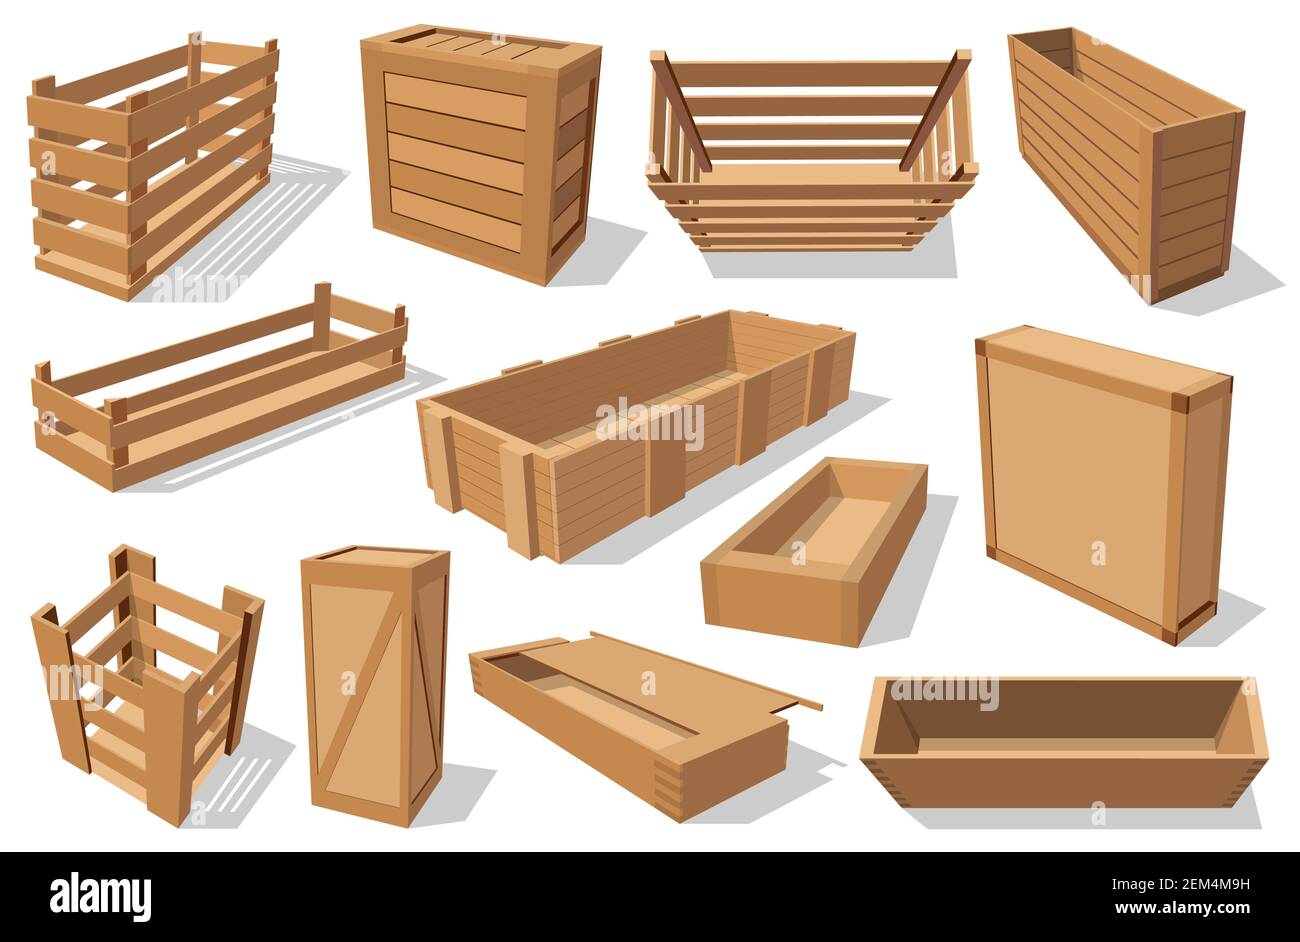 Crates and wooden drawers, empty transportation and distribution boxes isolated. Vector wooden pallets and parcels, vegetable and fruit containers wit Stock Vector